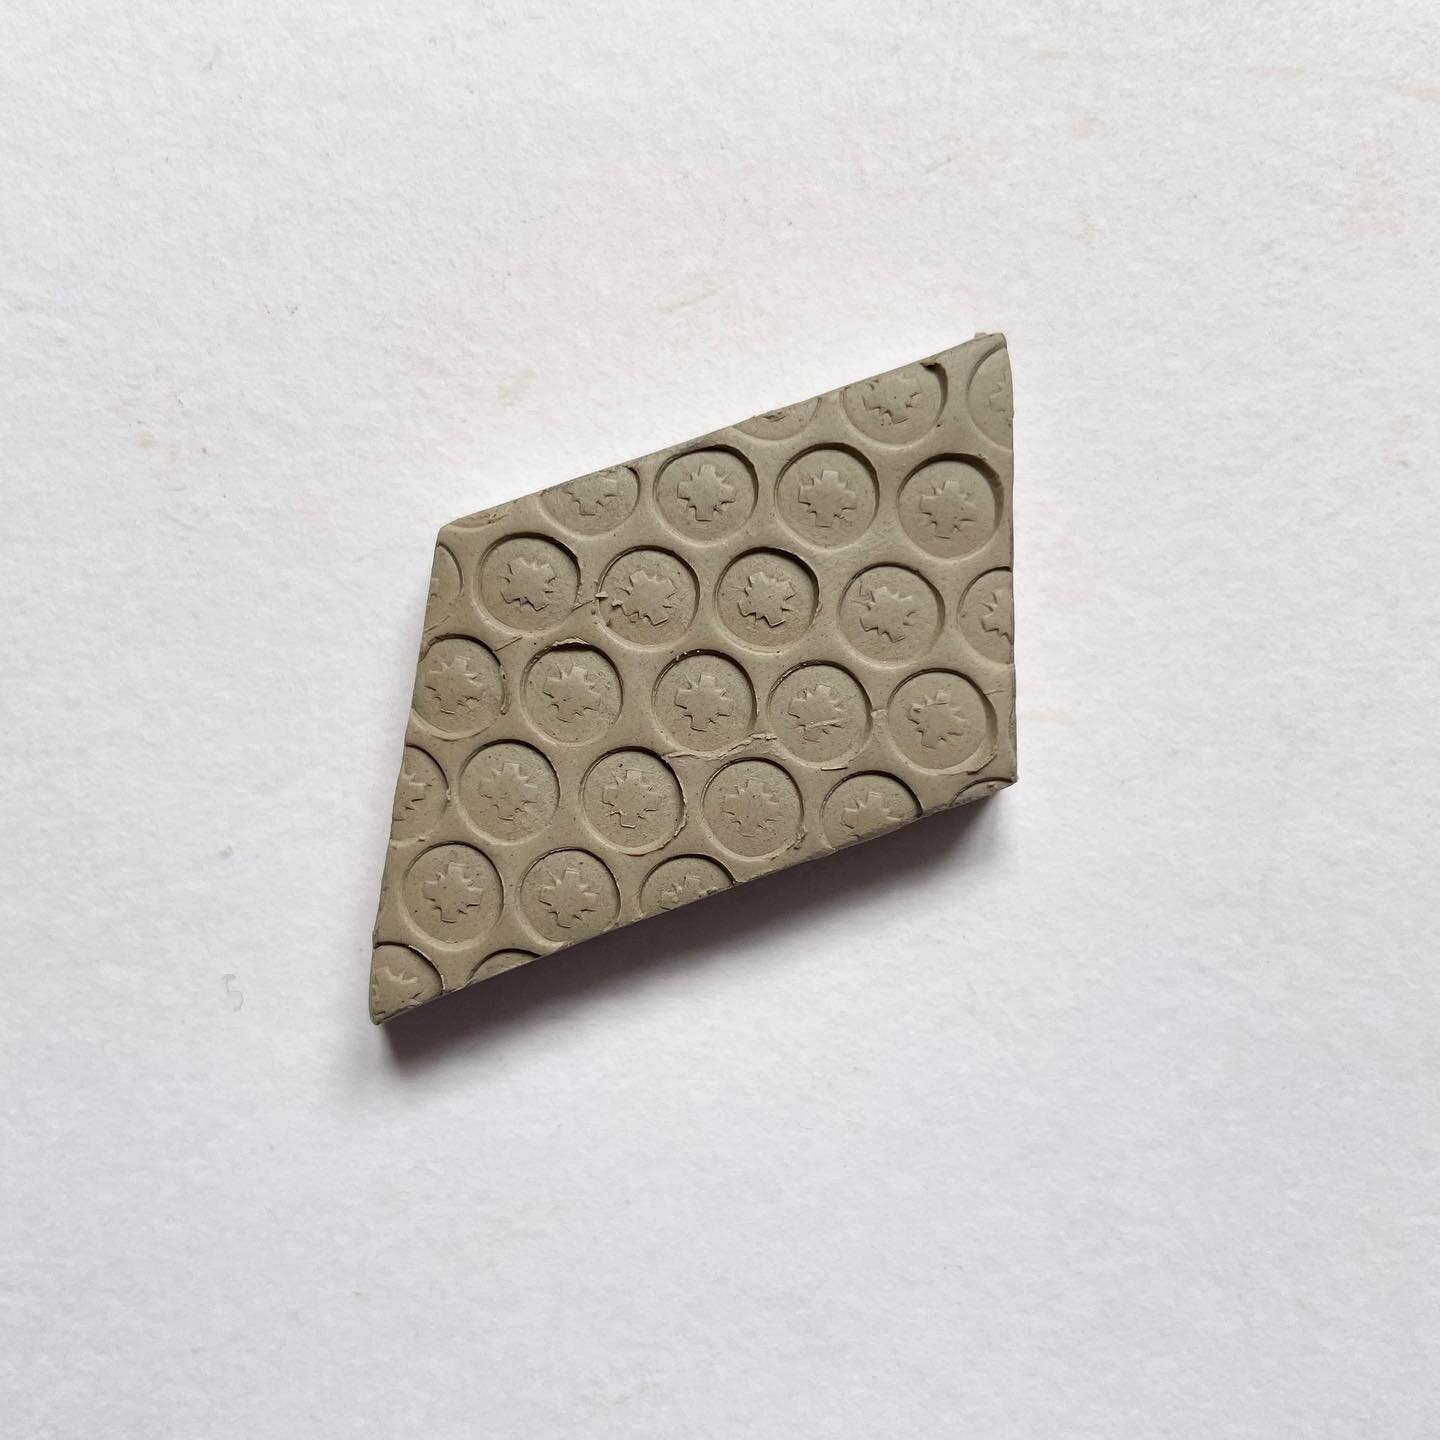 Screw head 

@dothe100dayproject

#the100dayproject #the100dayproject2023 #the100daychallenge 
#100daysoftexturedtiles
#100daysofrandomshapes #100tiles #surfacetexture #texturedtiles #nakedclay #challengeyourself #design #ideas #experimenting #creati